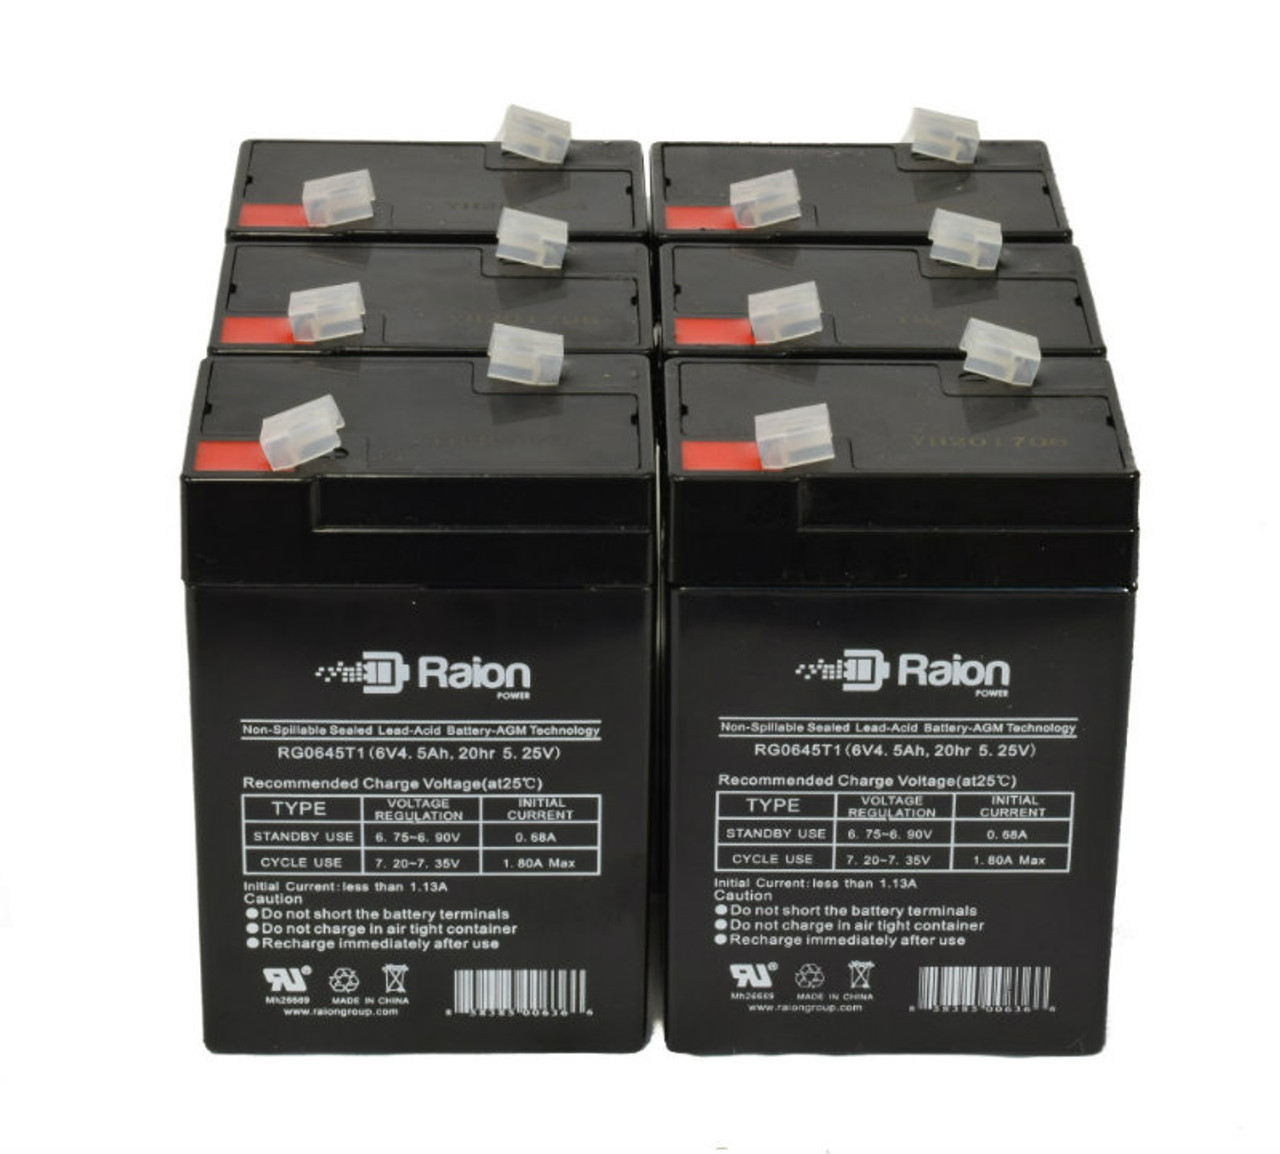 Raion Power 6 Volt 4.5Ah RG0645T1 Replacement Battery for Sentry PM655 - 6 Pack